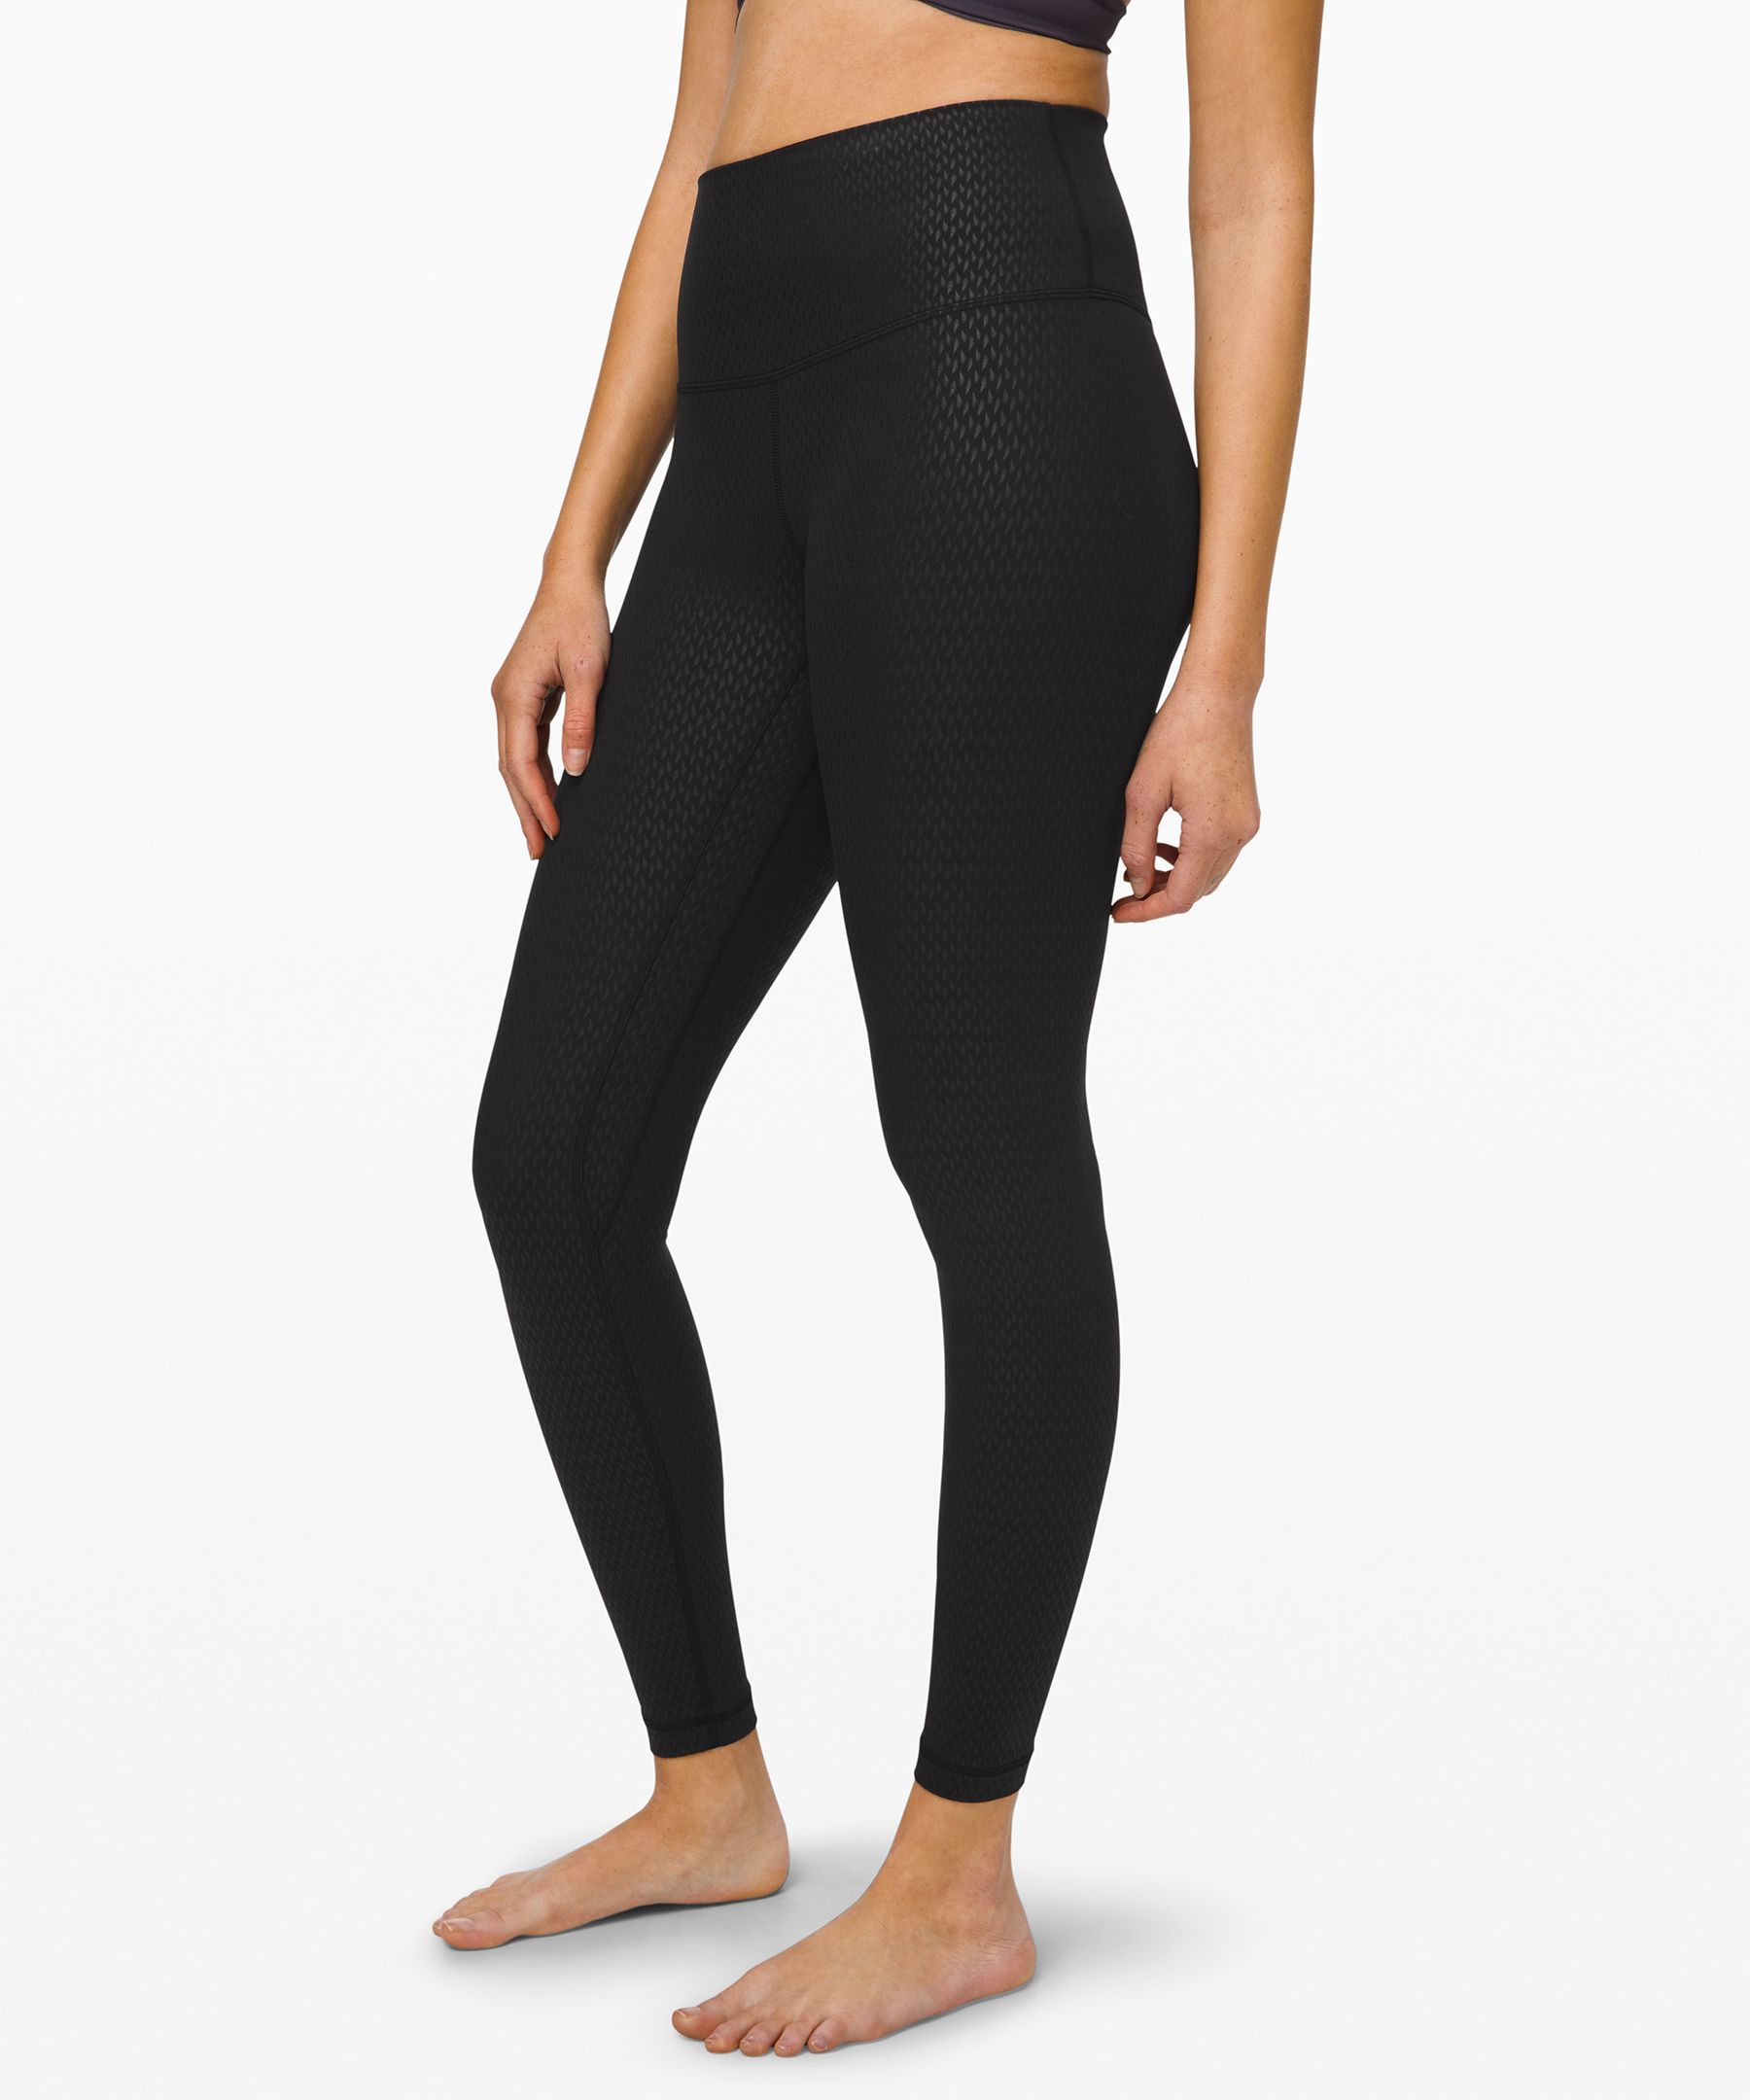 Can You Wear Gym Leggings For Hiking Near